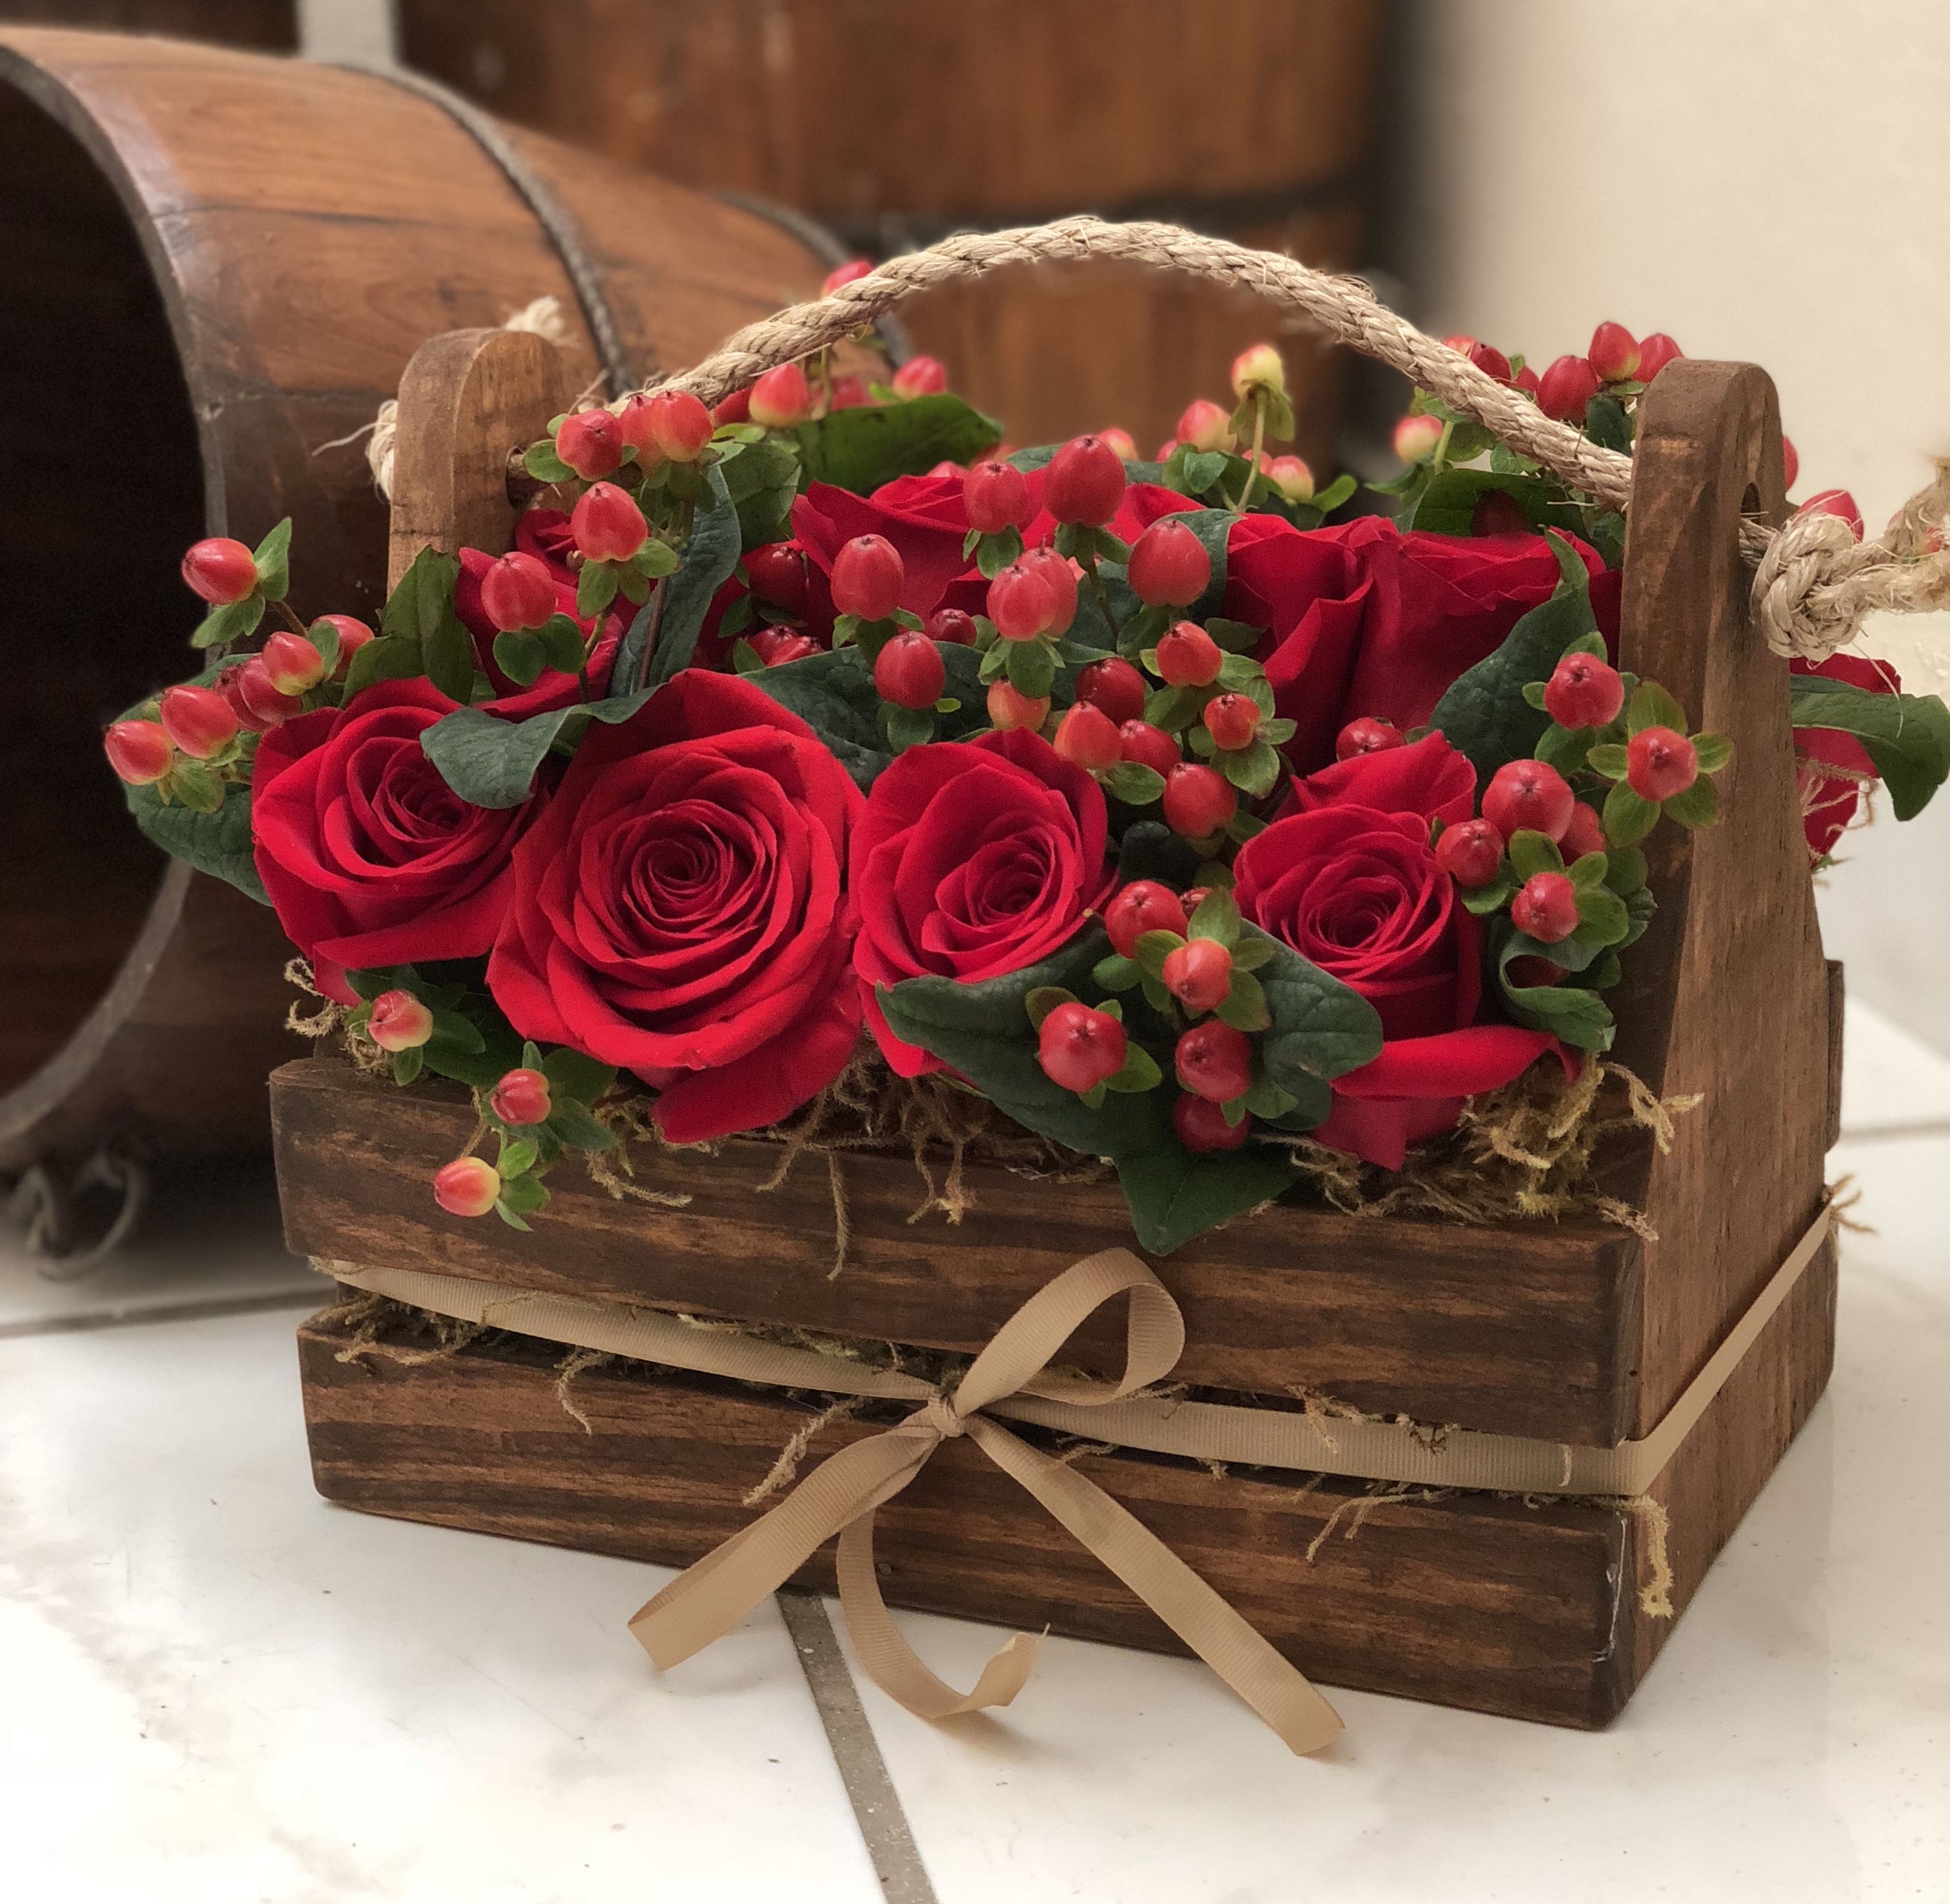 BloomCraft Gift Baskets: Your Way to the Unique Beauty and Joy of Floral Gifts